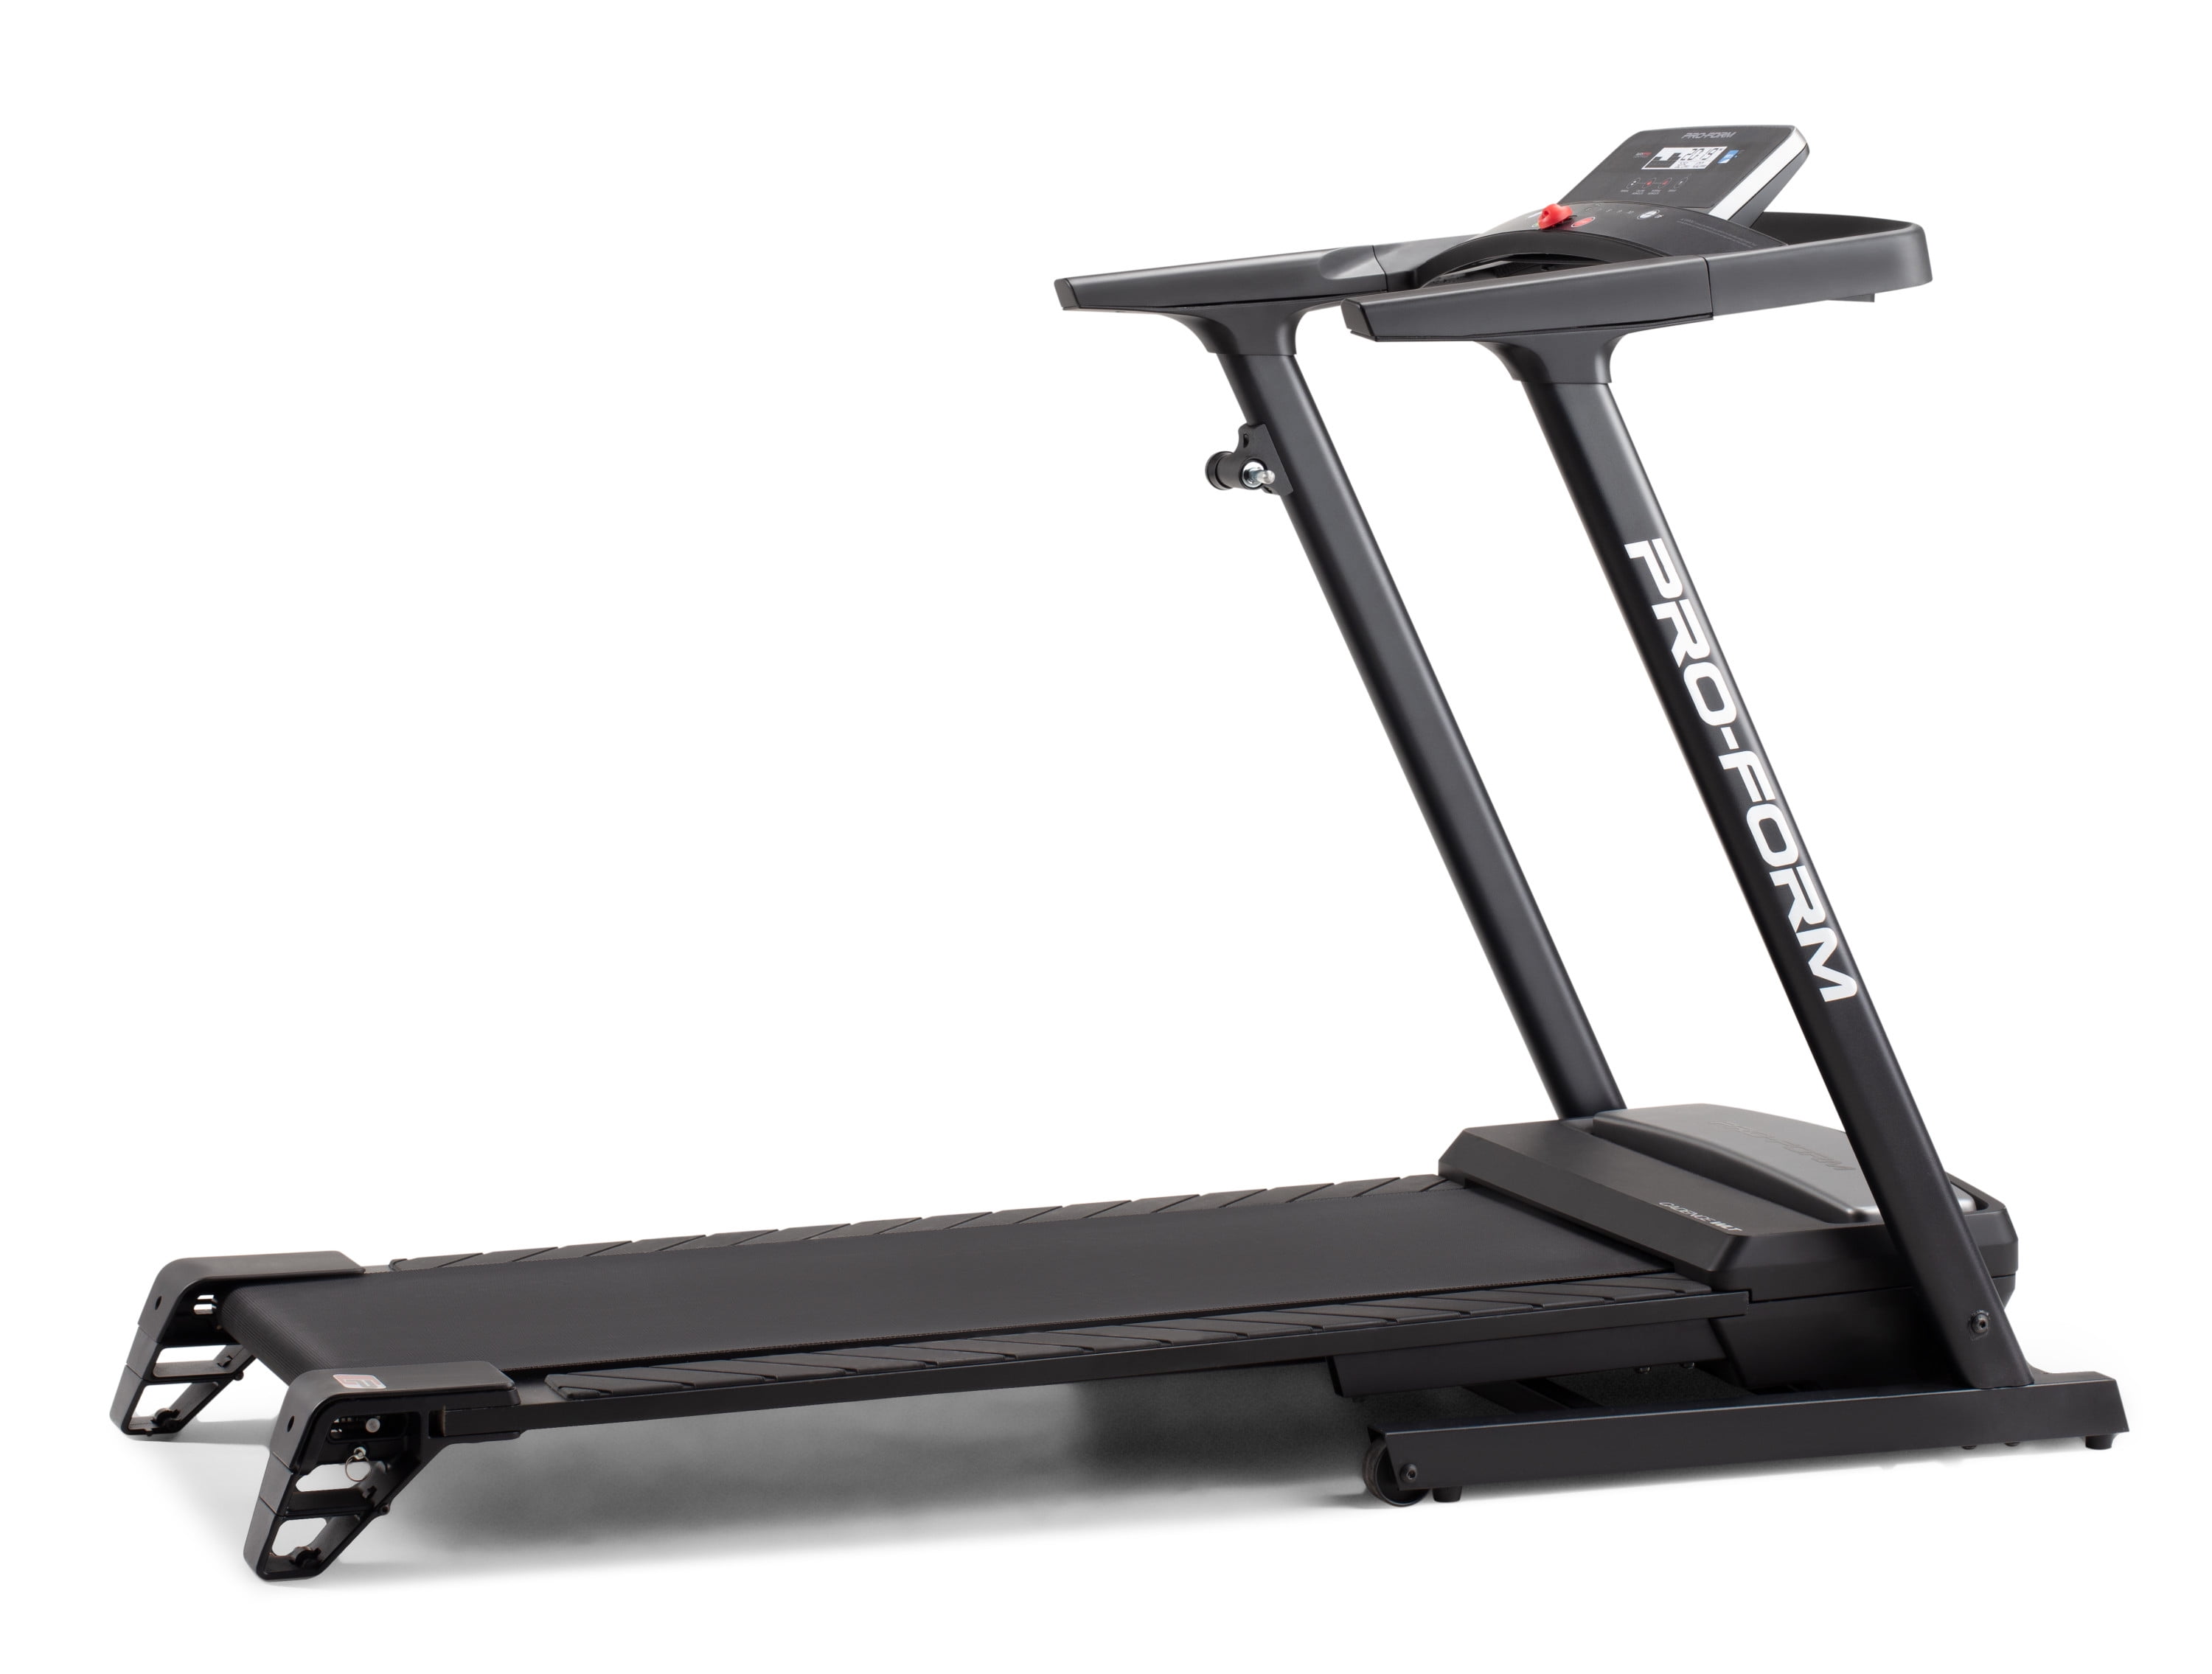 ProForm Crosswalk Treadmill Upper Display Console See Compat Inside for sale online 